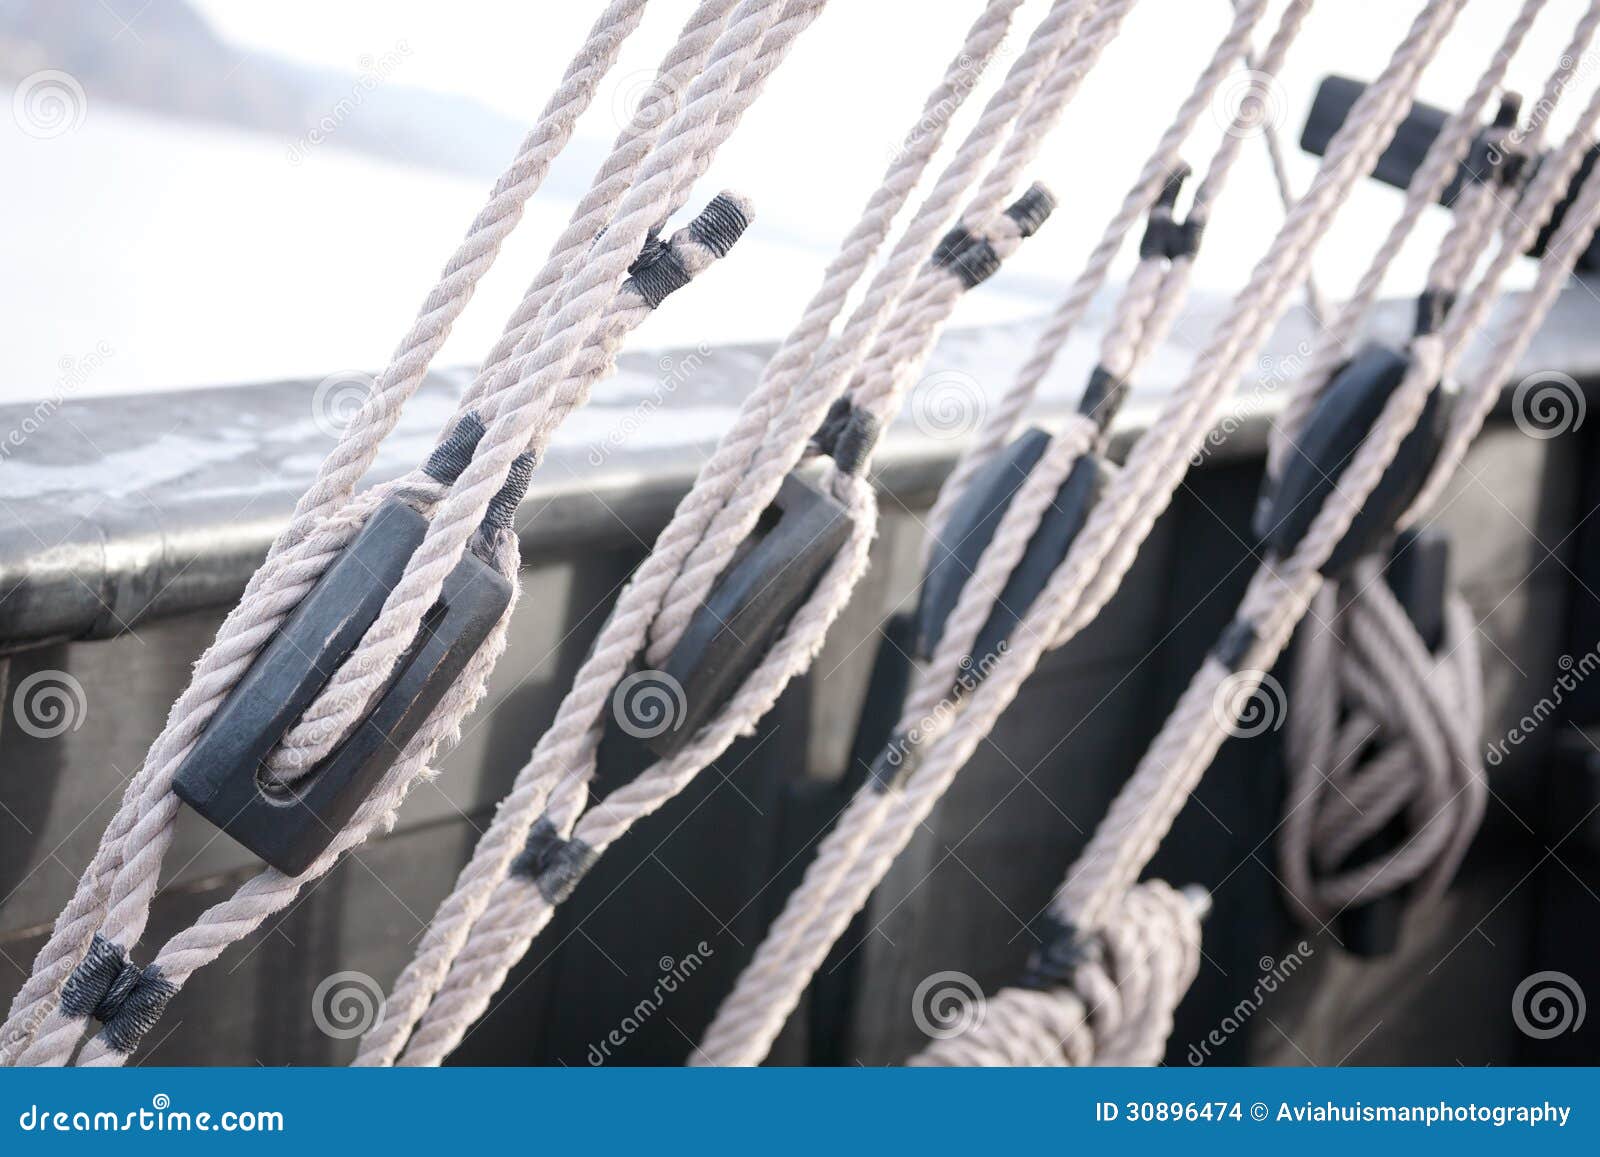 Rigging On An Old Sail Boat Stock Images - Image: 30896474